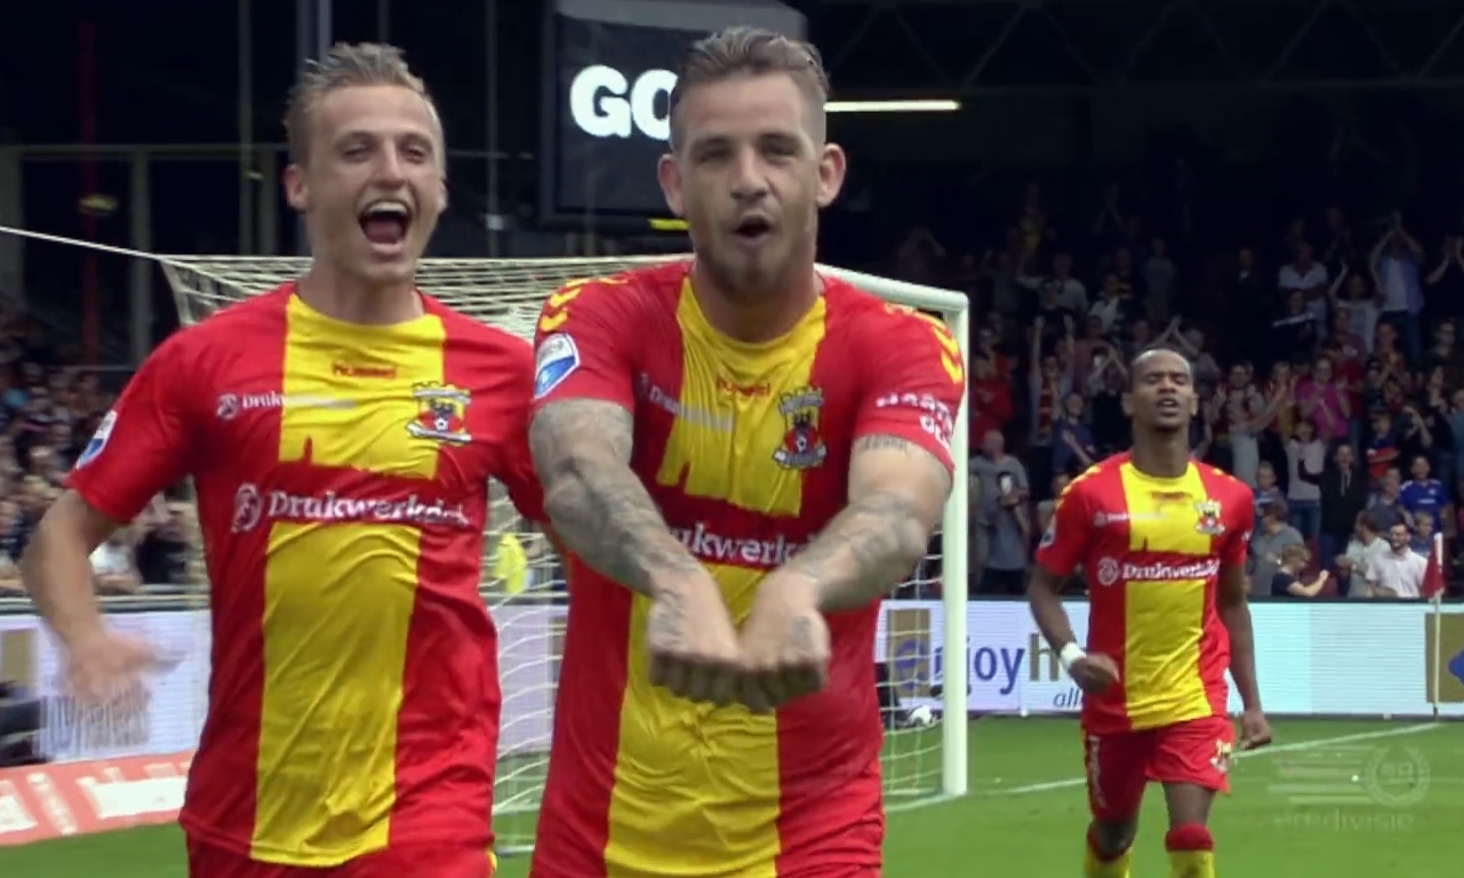 Kevin Brands (centre) playing for Go Ahead Eagles.